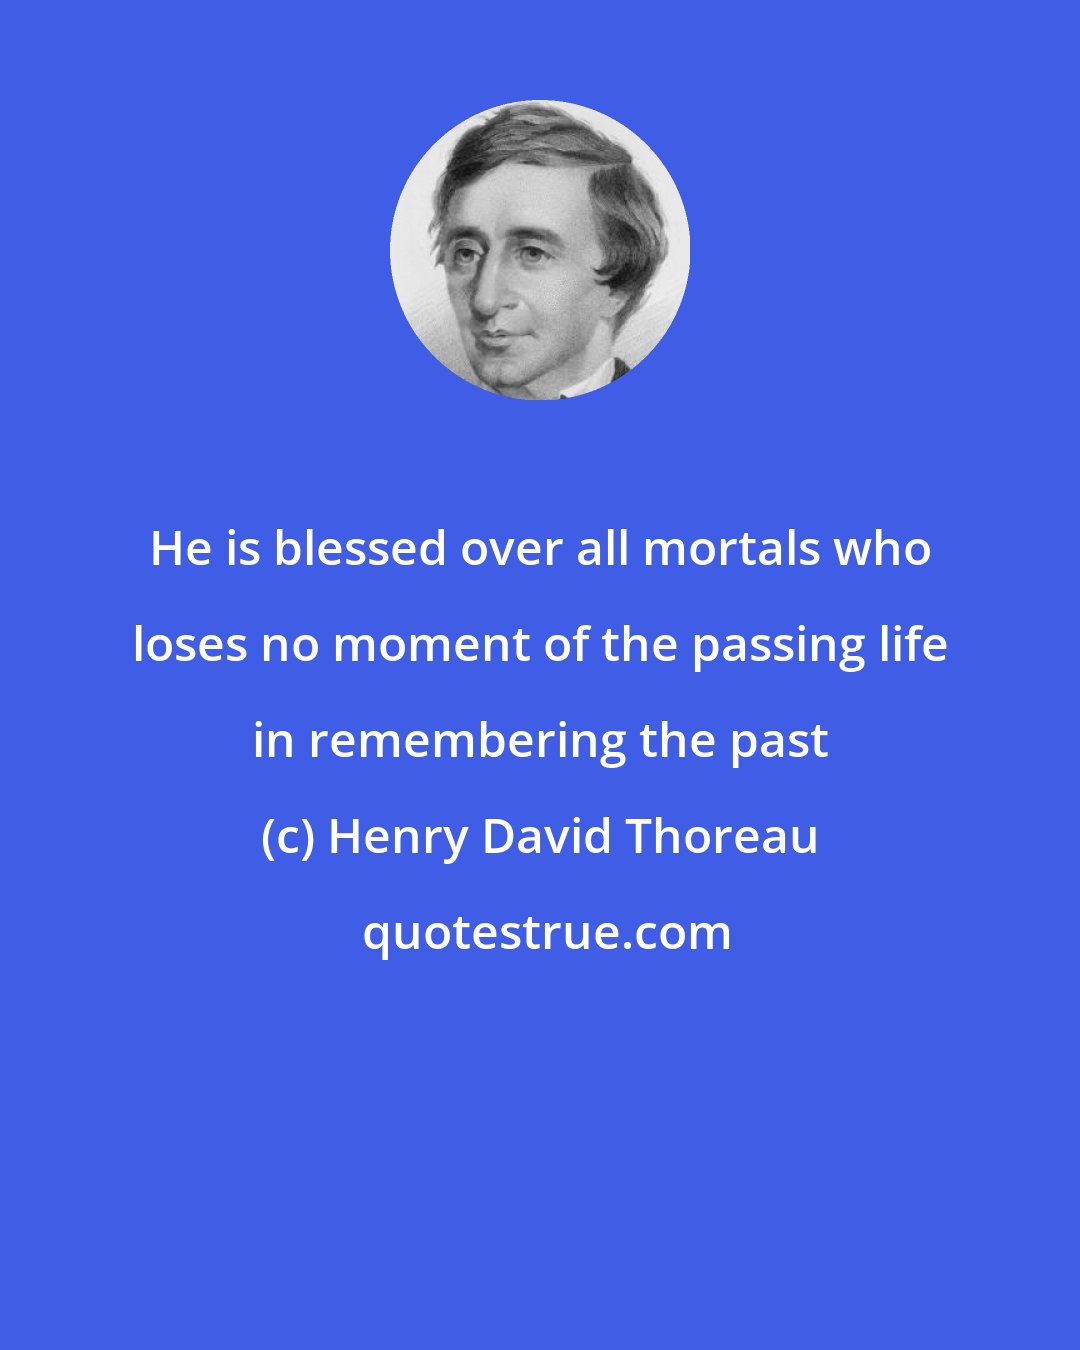 Henry David Thoreau: He is blessed over all mortals who loses no moment of the passing life in remembering the past